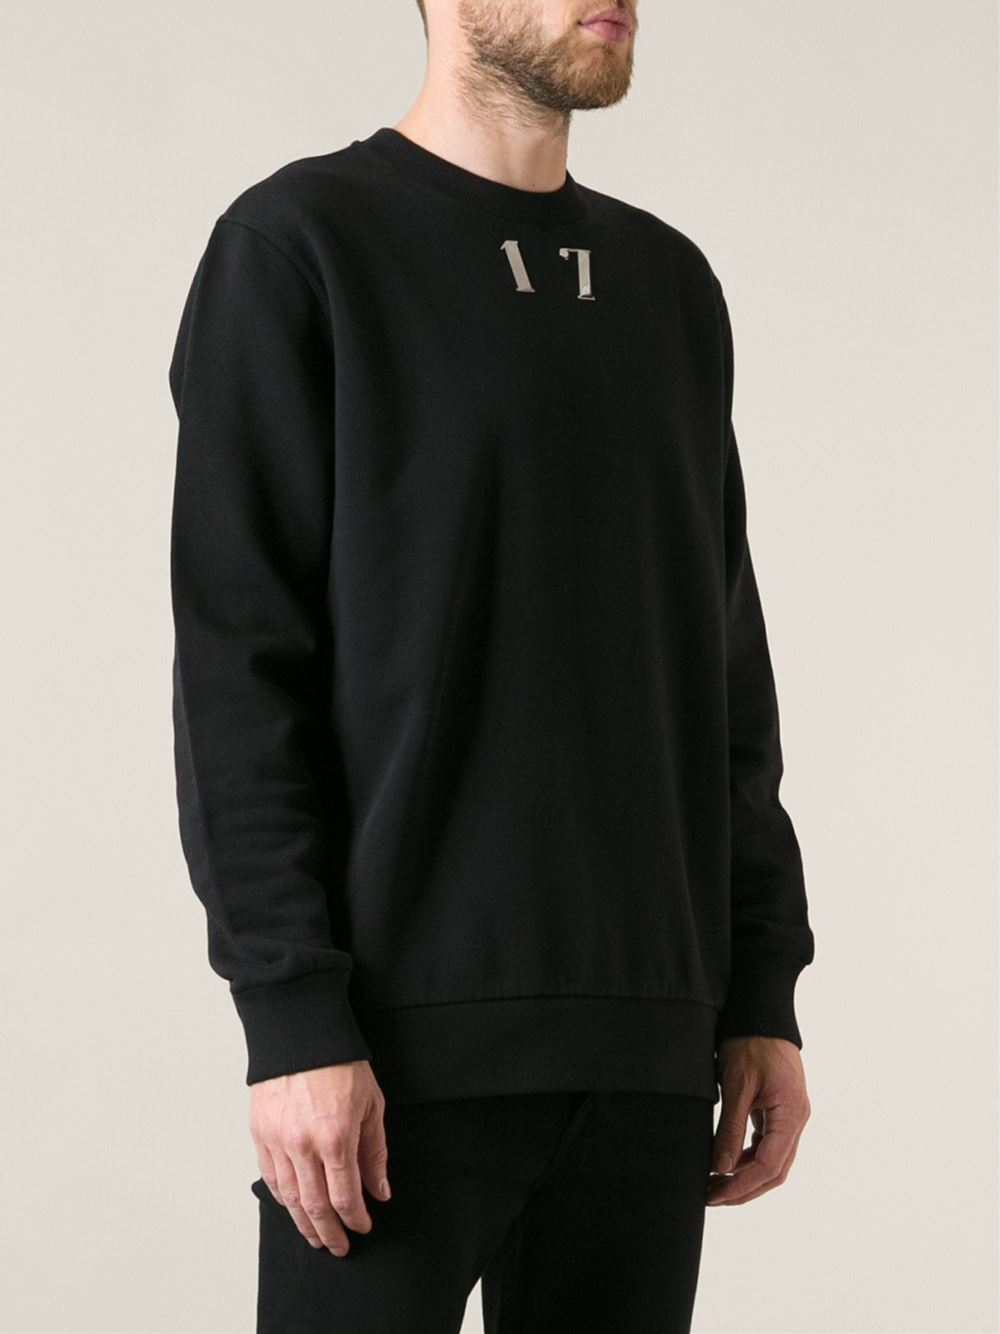 Lyst - Givenchy '17' Sweatshirt in Black for Men